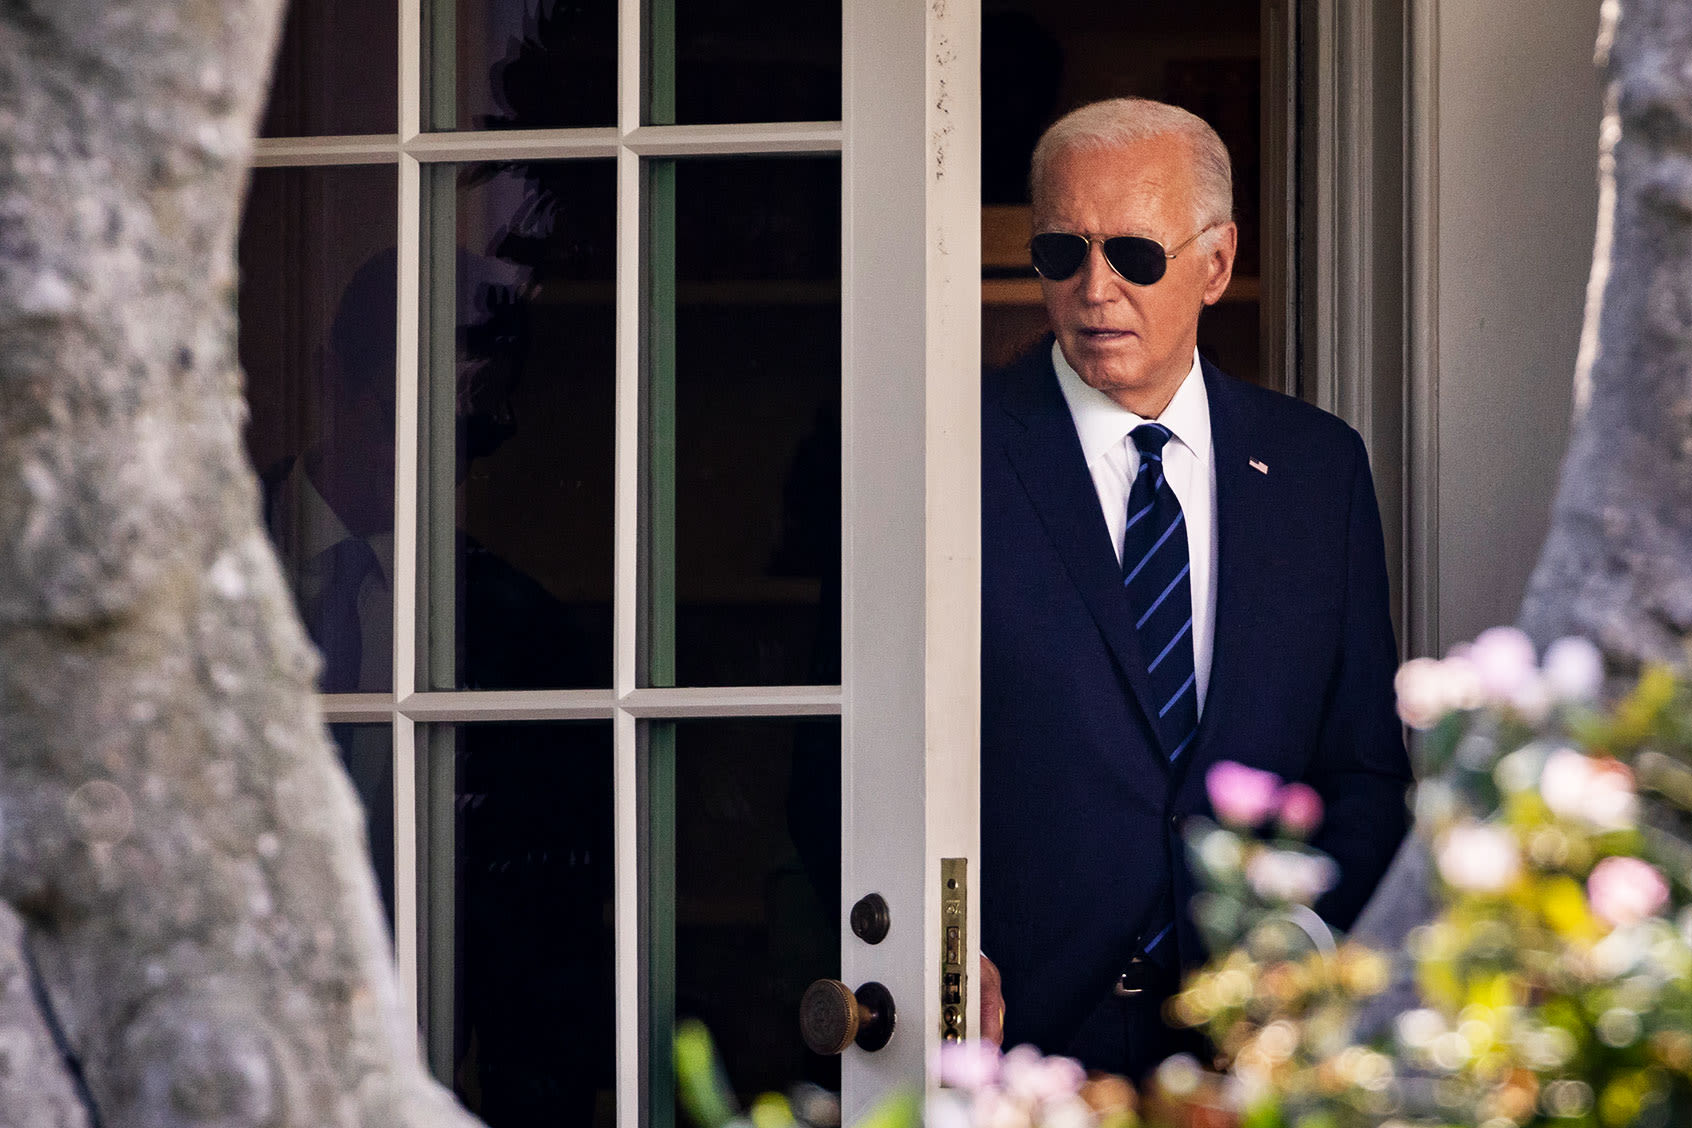 "Back to being angry": Pelosi "working the phones" to oust Biden as Democratic mutiny continues